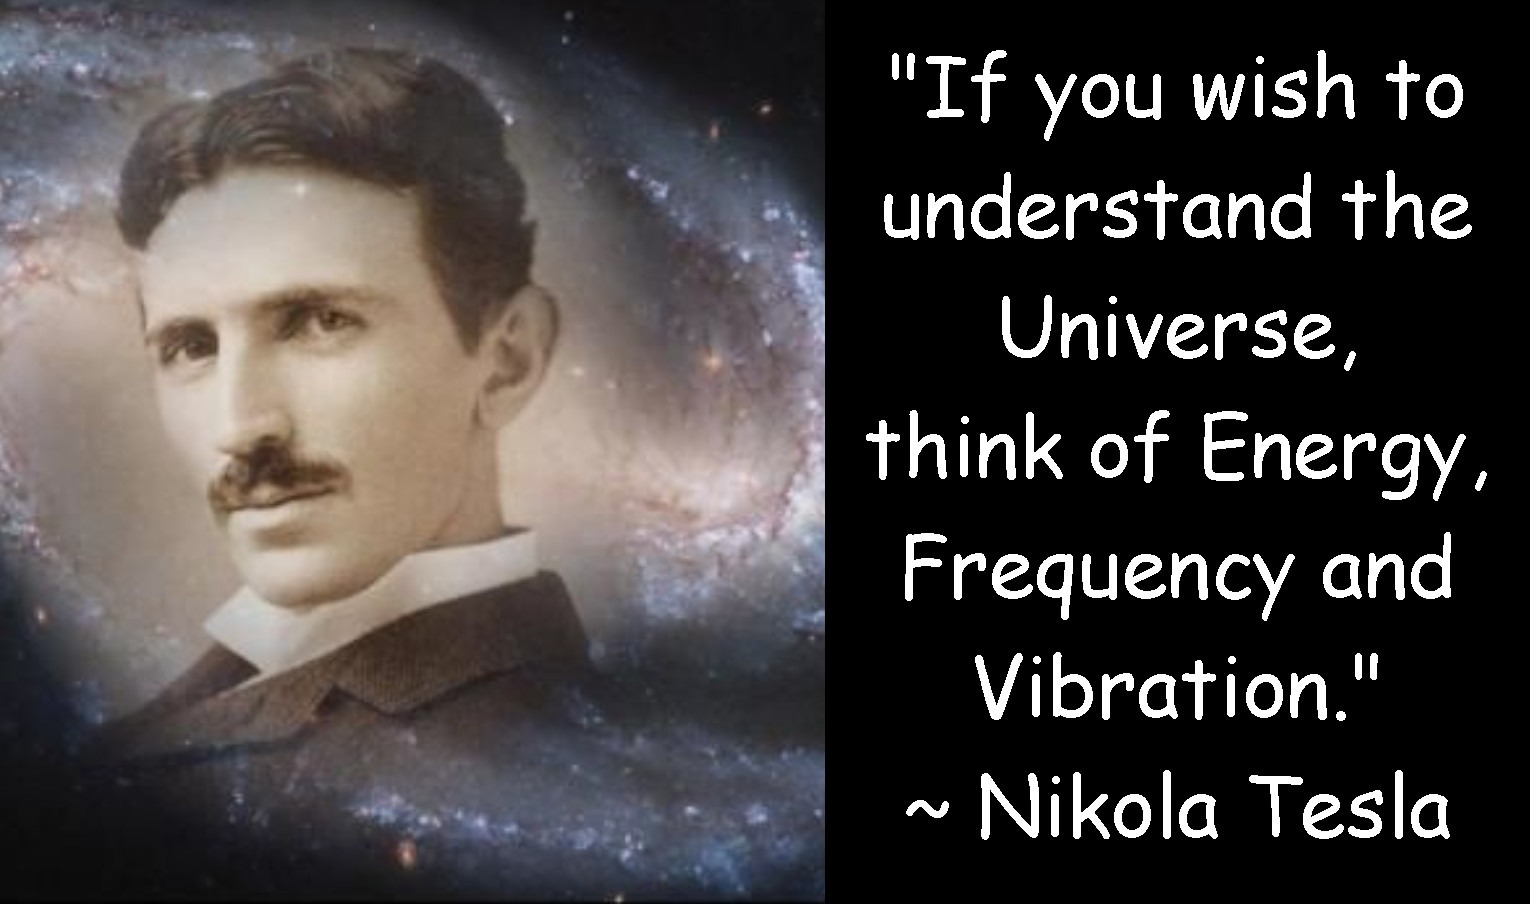 Nikola Tesla; If you wish to understand the universe, think of energy, frequency and vibration; electroceutical; Healy